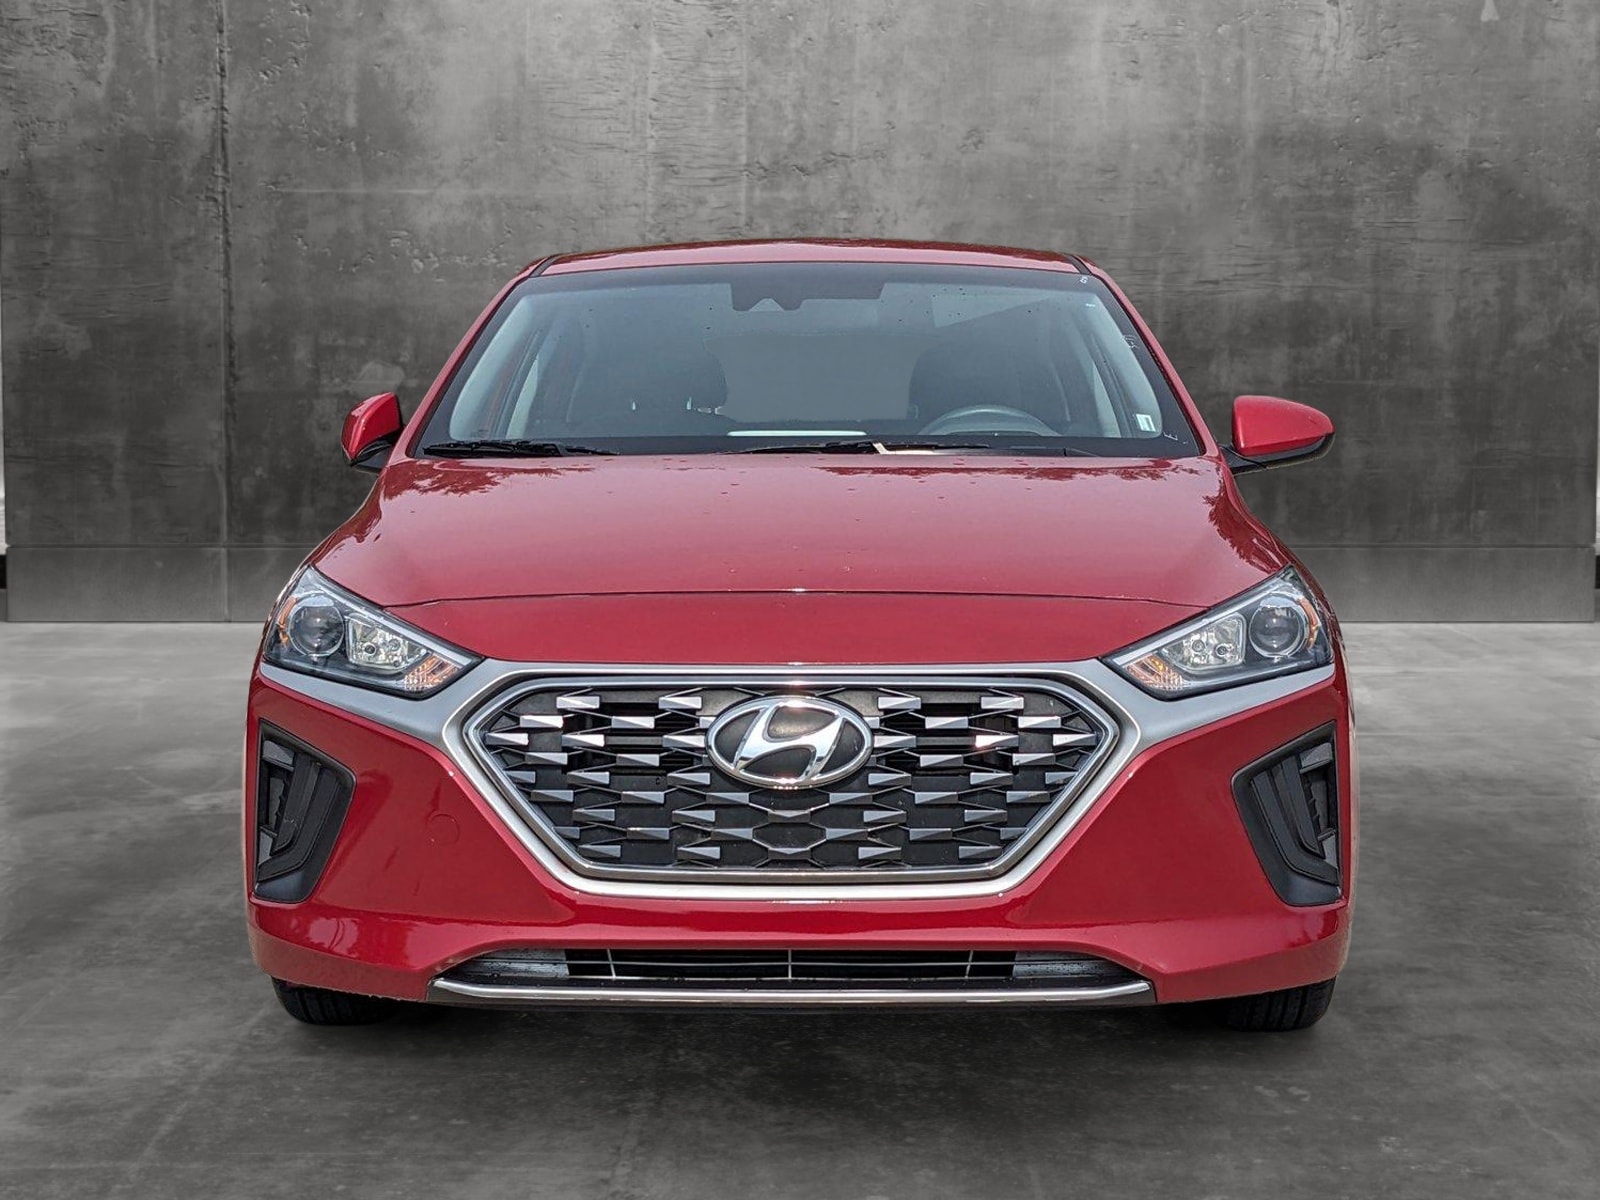 Used 2020 Hyundai IONIQ Blue with VIN KMHC65LC3LU239310 for sale in North Richland Hills, TX